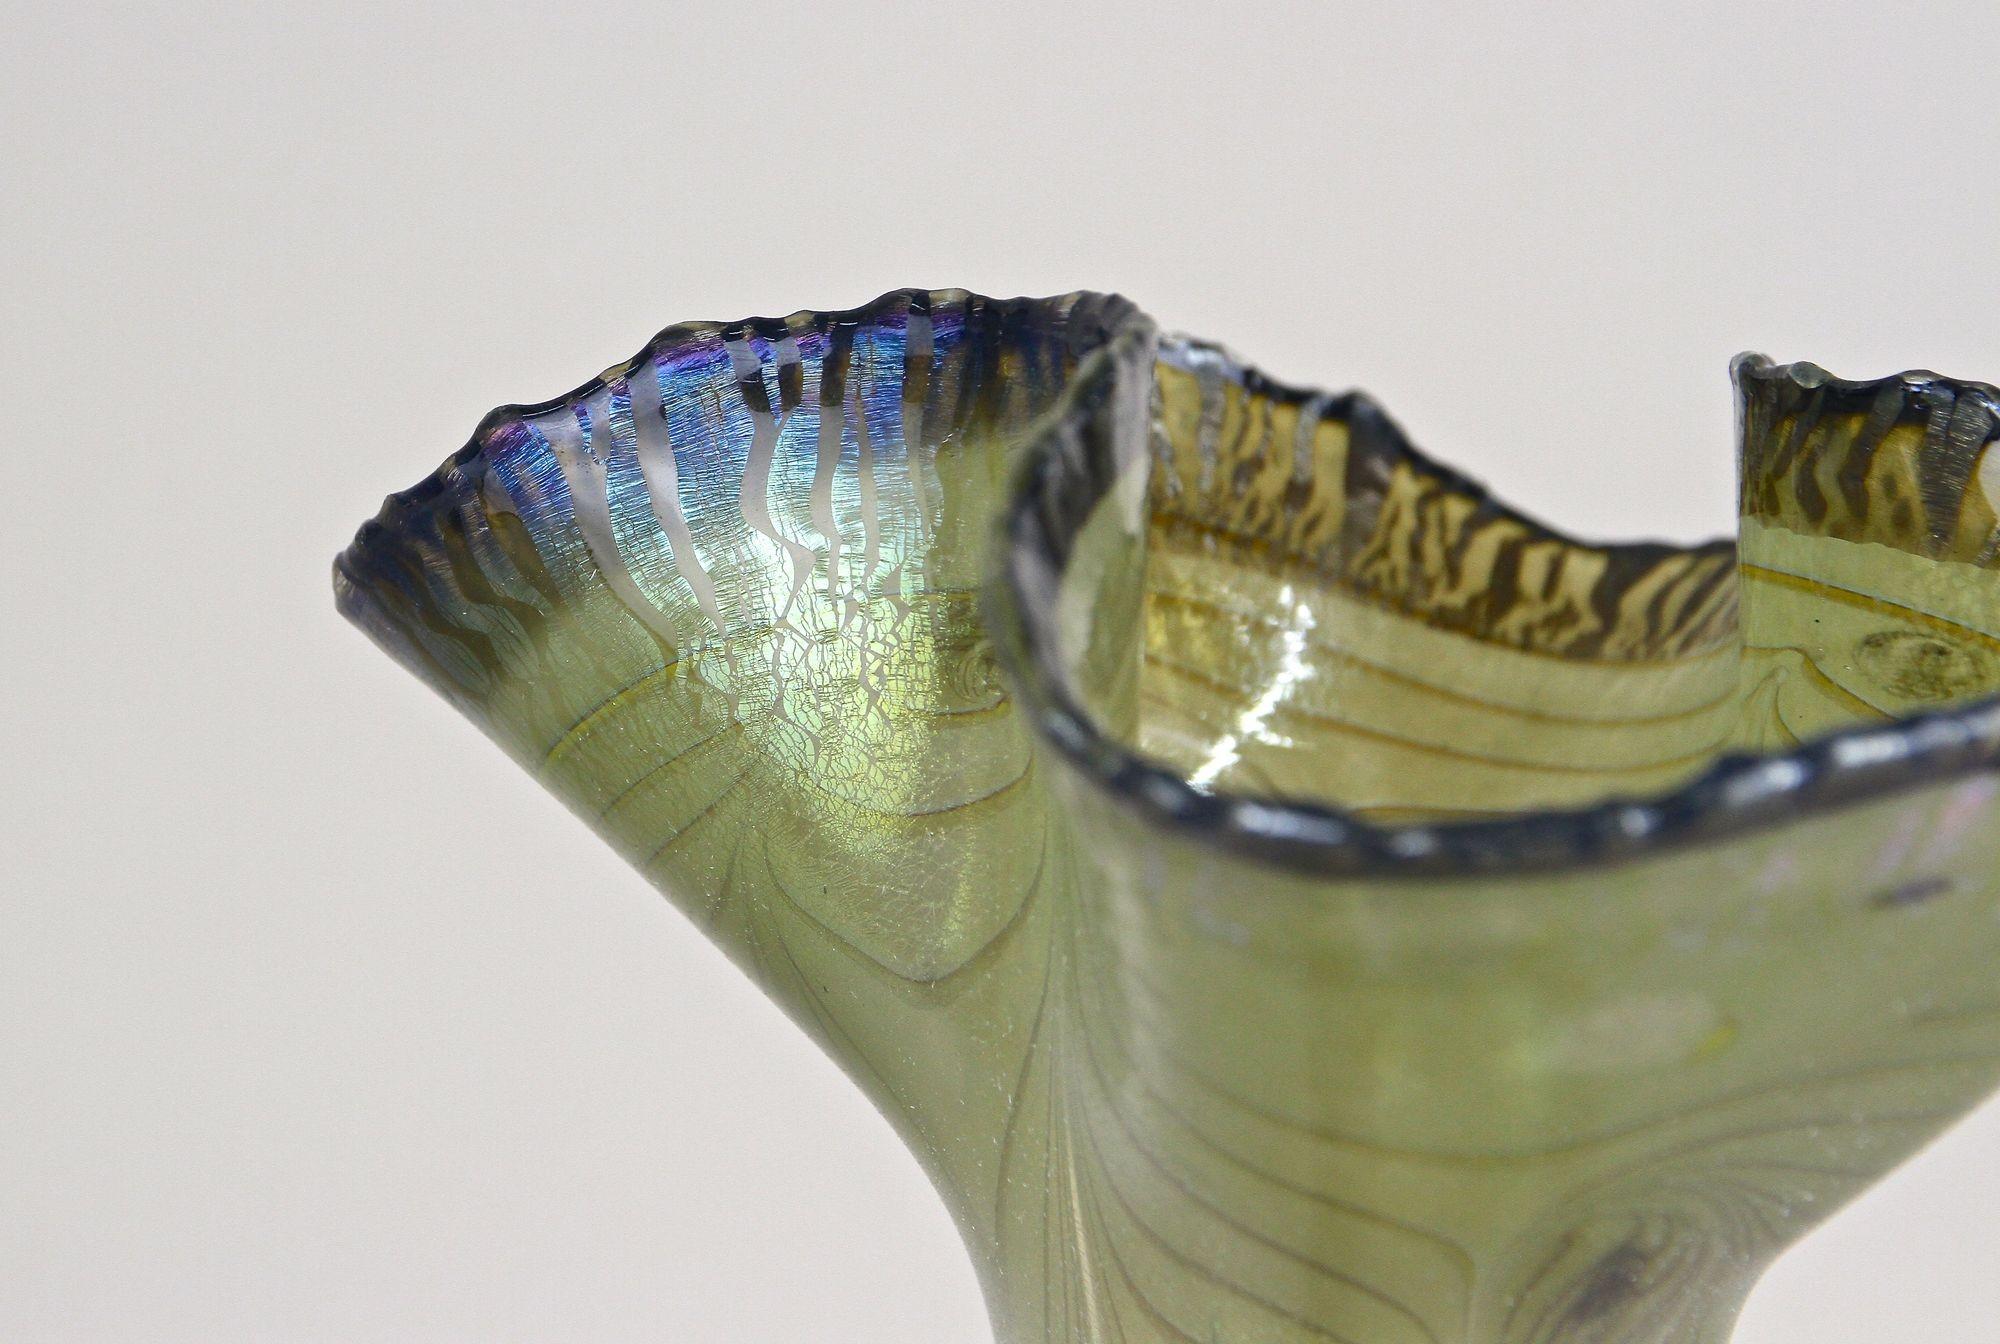 20th Century Iridescent Glass Vase by E. Eisch - Signed, Germany 1982 For Sale 1